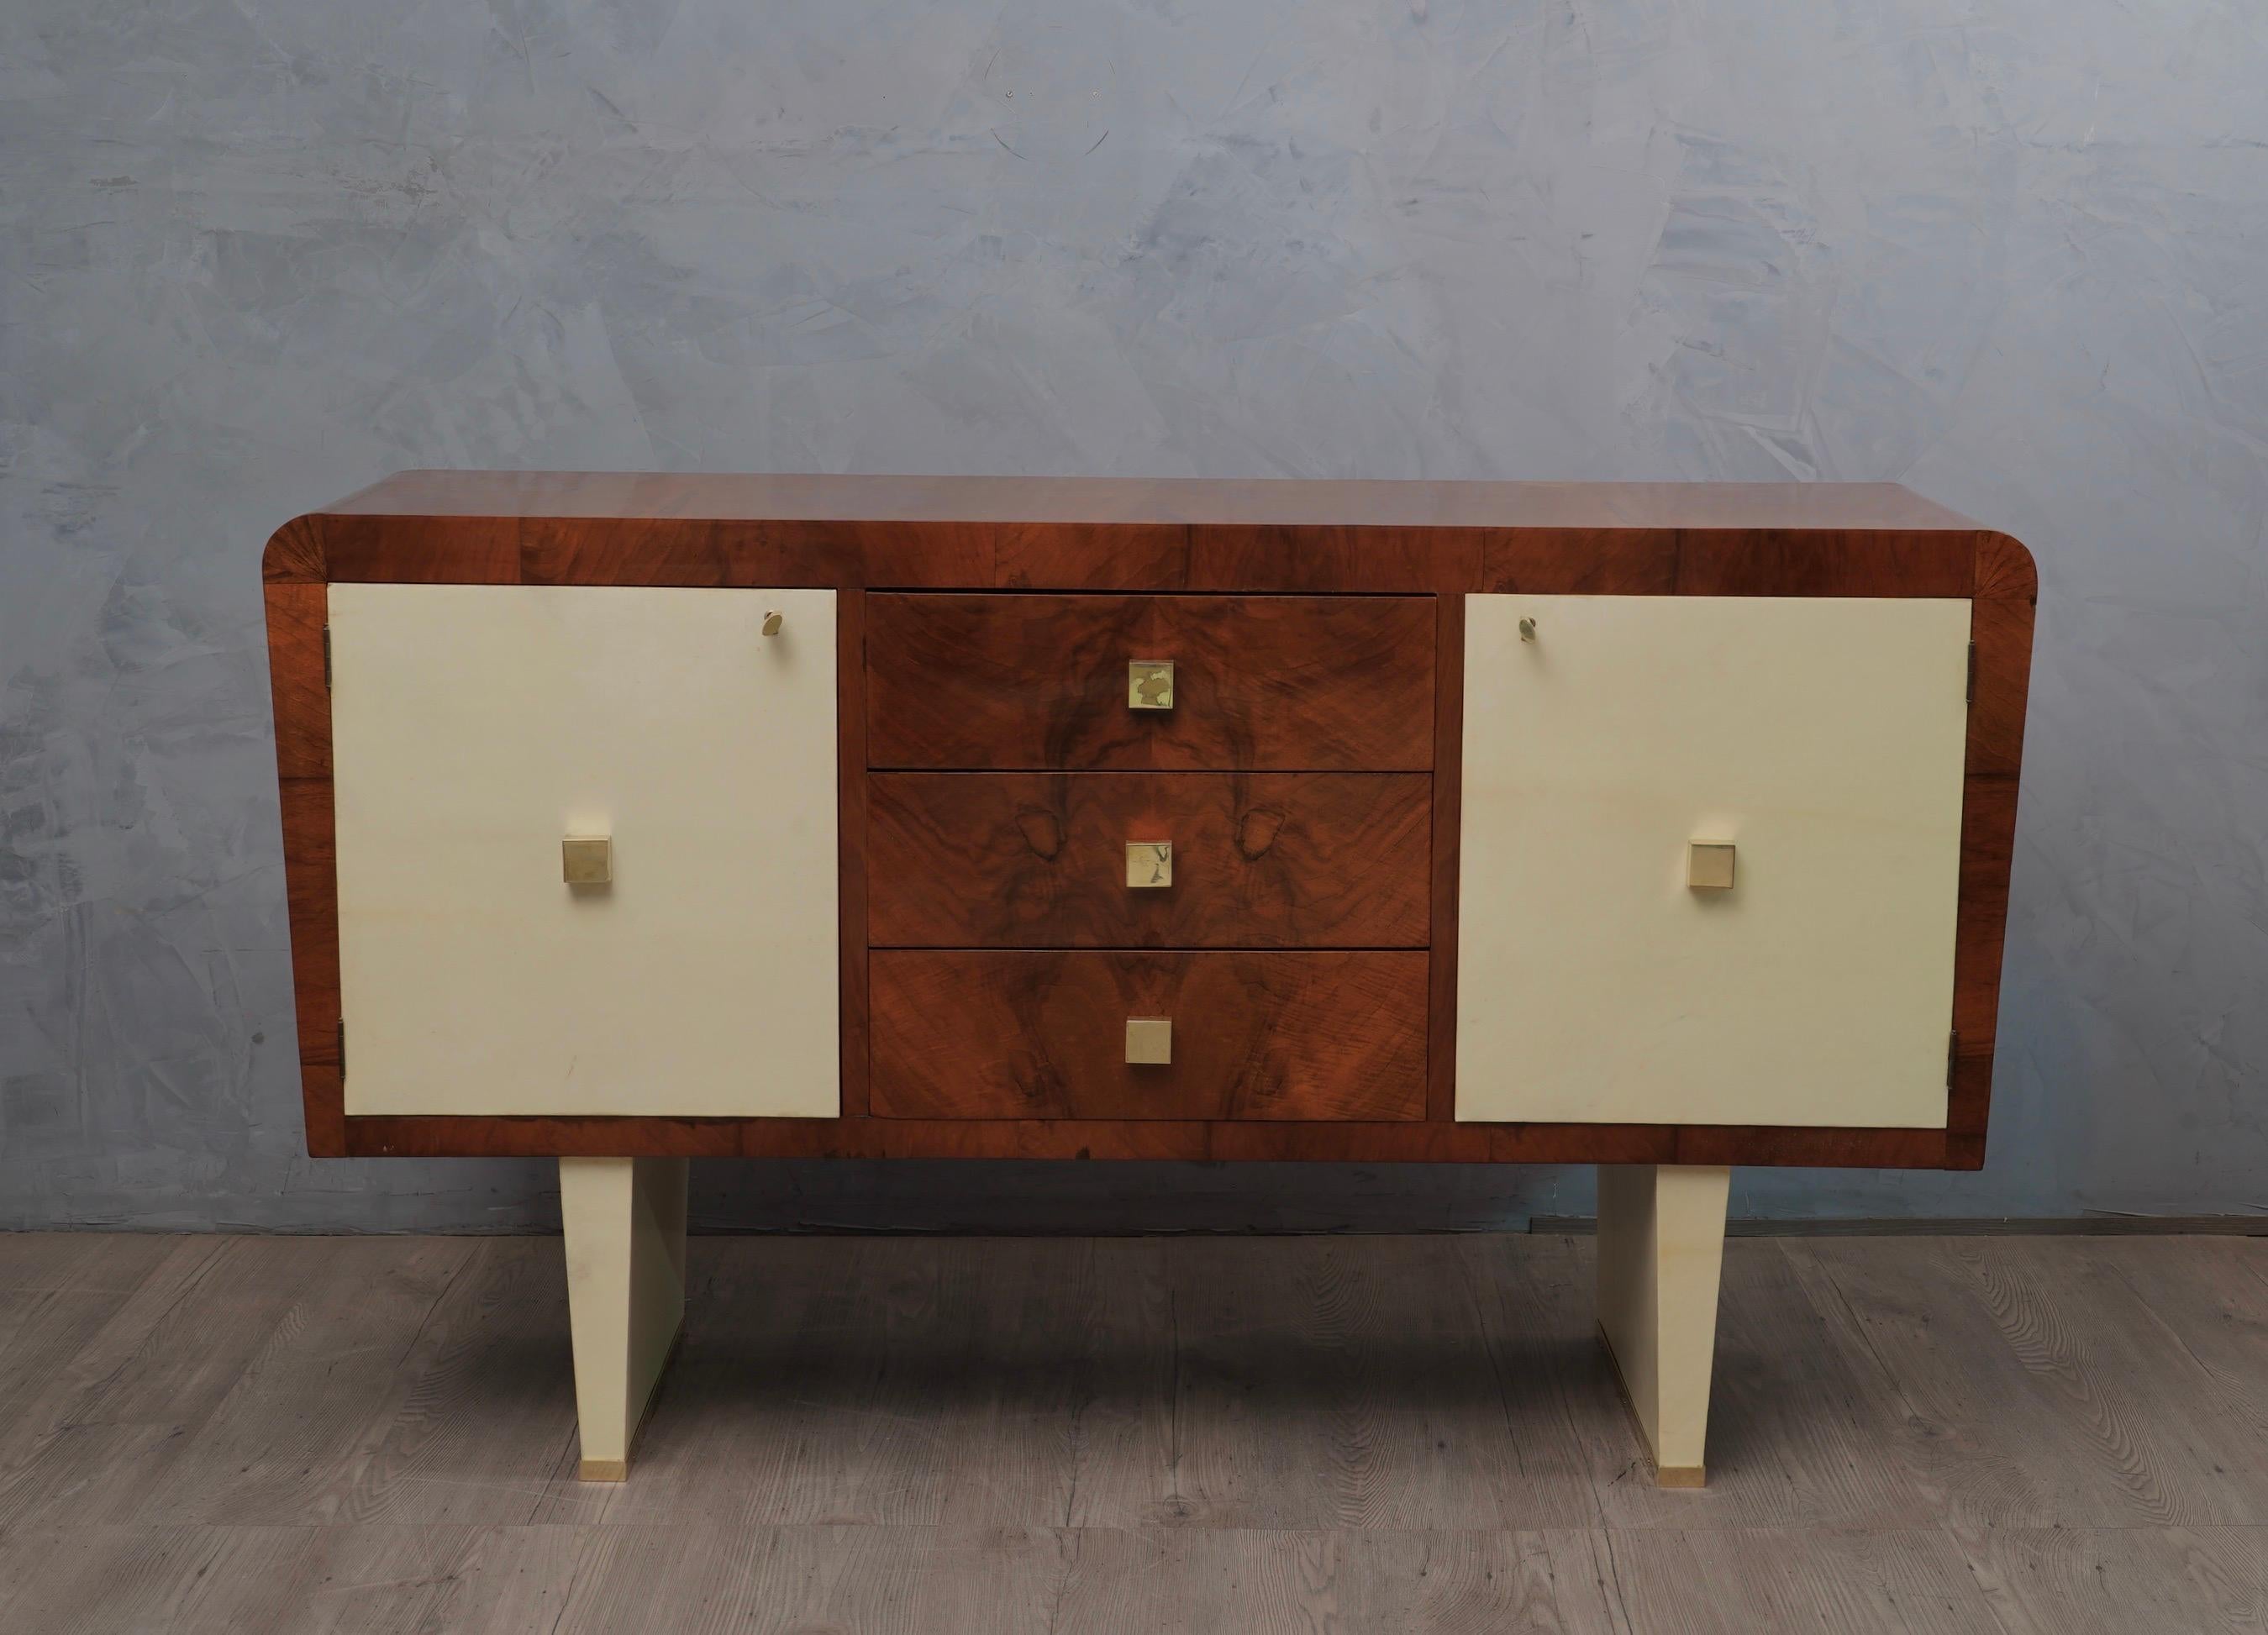 From Italian style this sideboard made of walnut wood is embellished with goatskin inserts. A subtle all over patina emphasizes the grain of the walnut.

It consists of two side doors covered in goatskin and three drawers in the middle of walnut